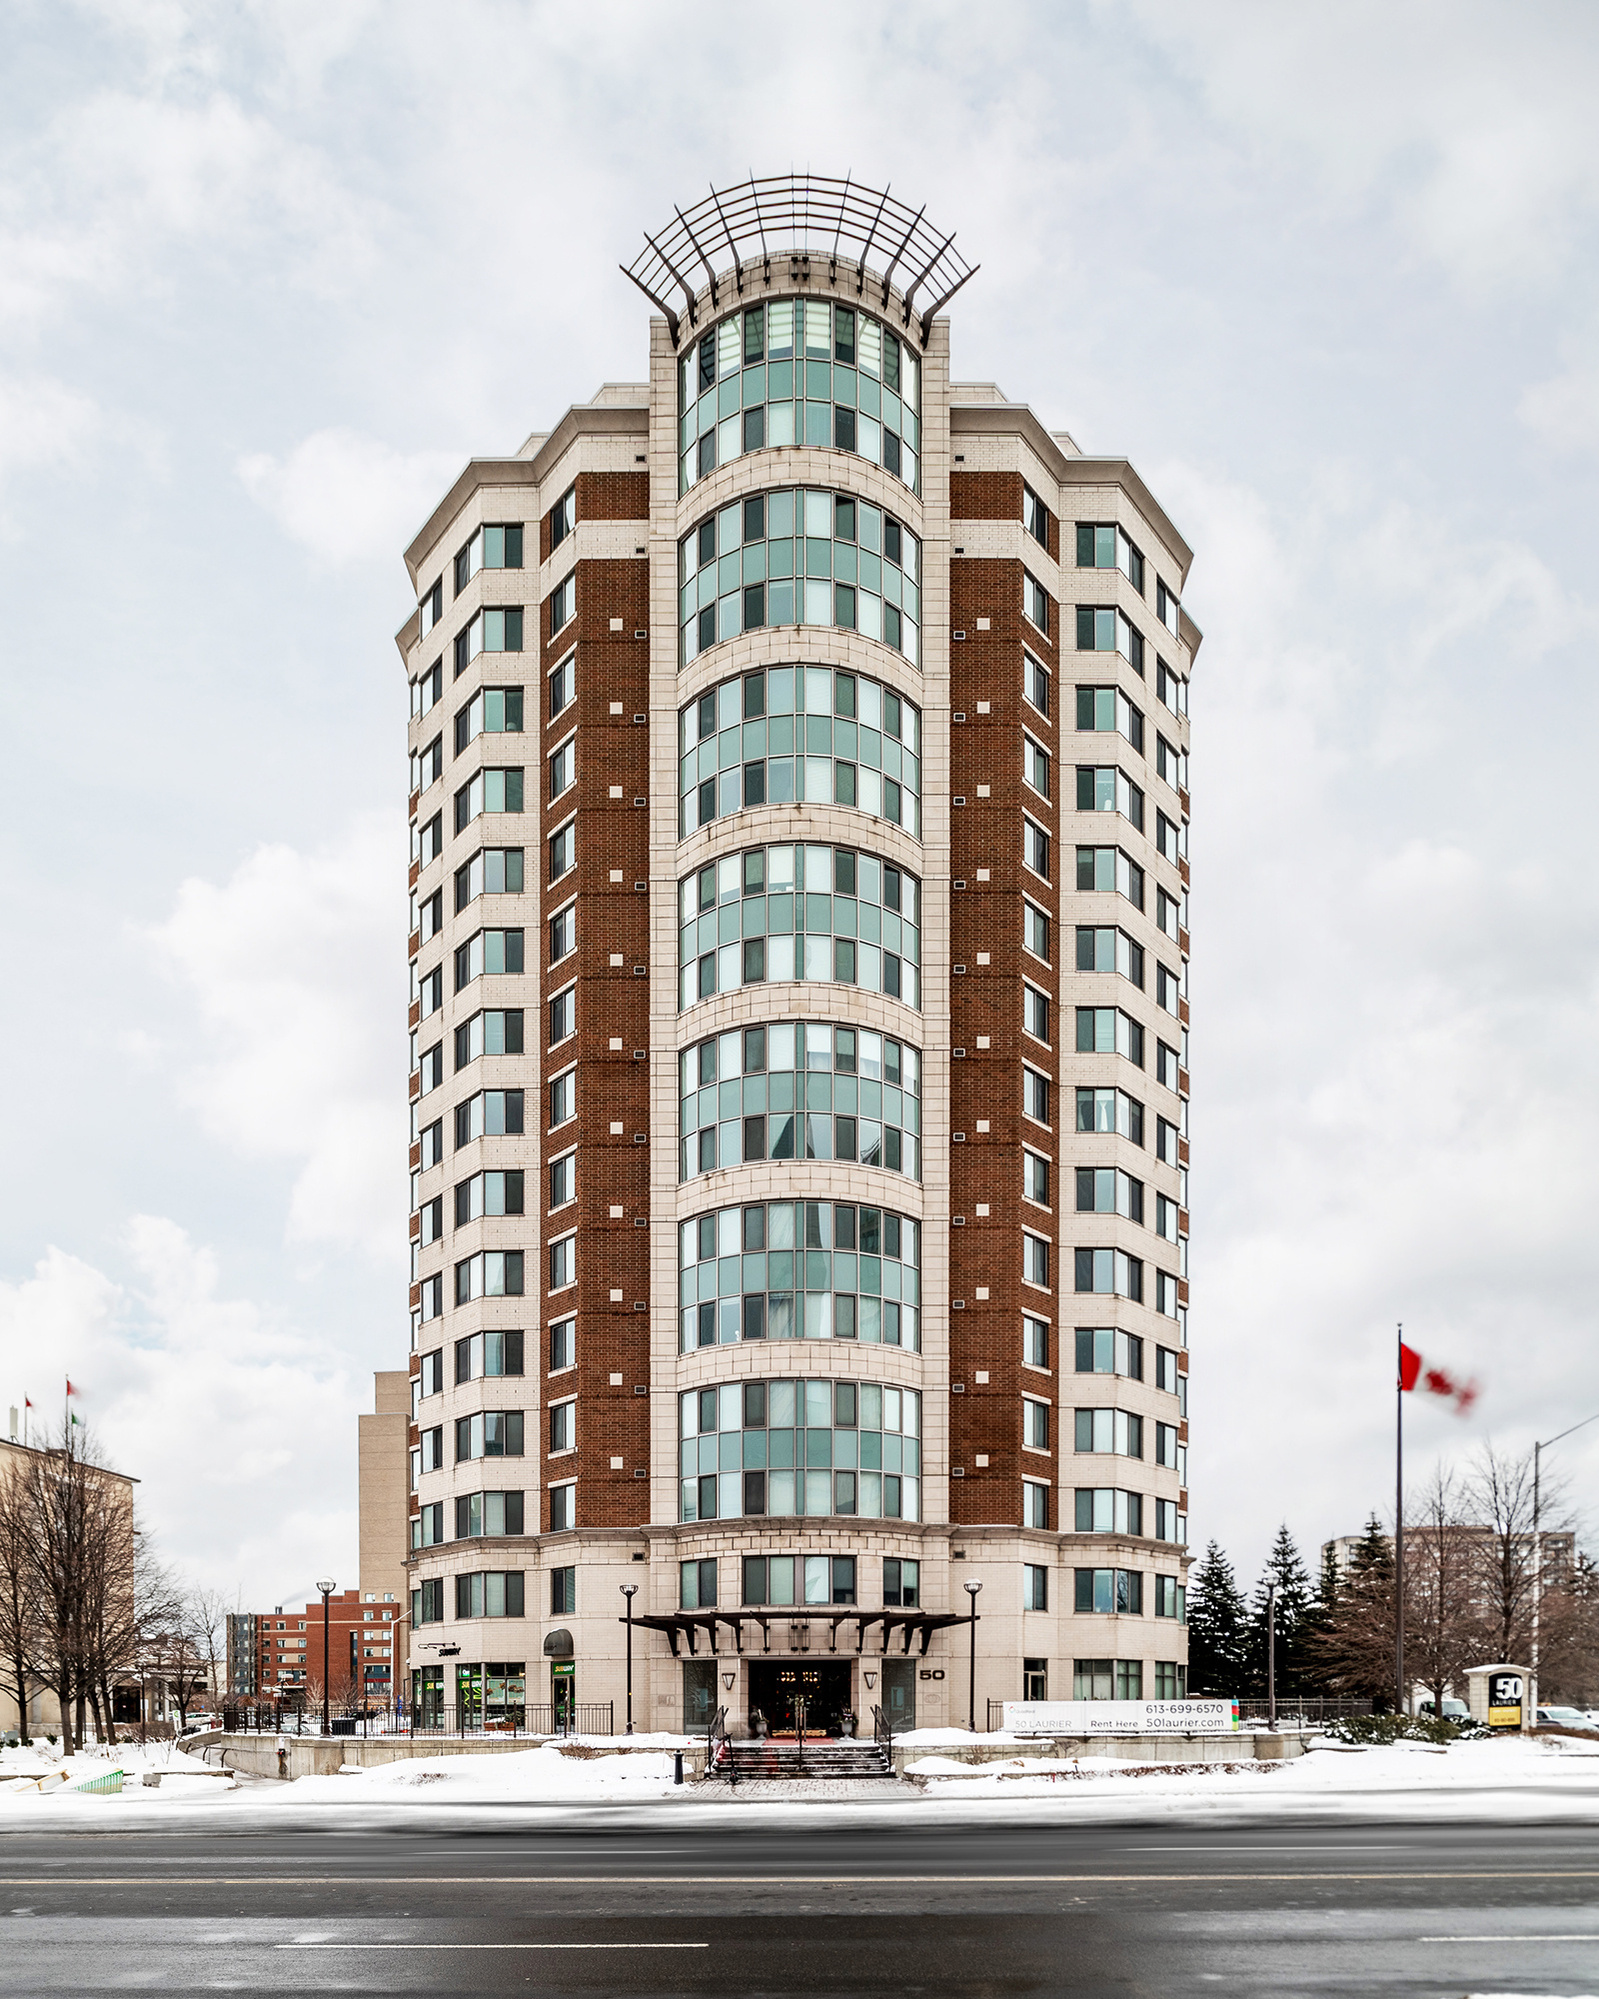 Quadreal 50 Laurier Avenue Ottawa in winter by Frank Fenn Architectural Photographer